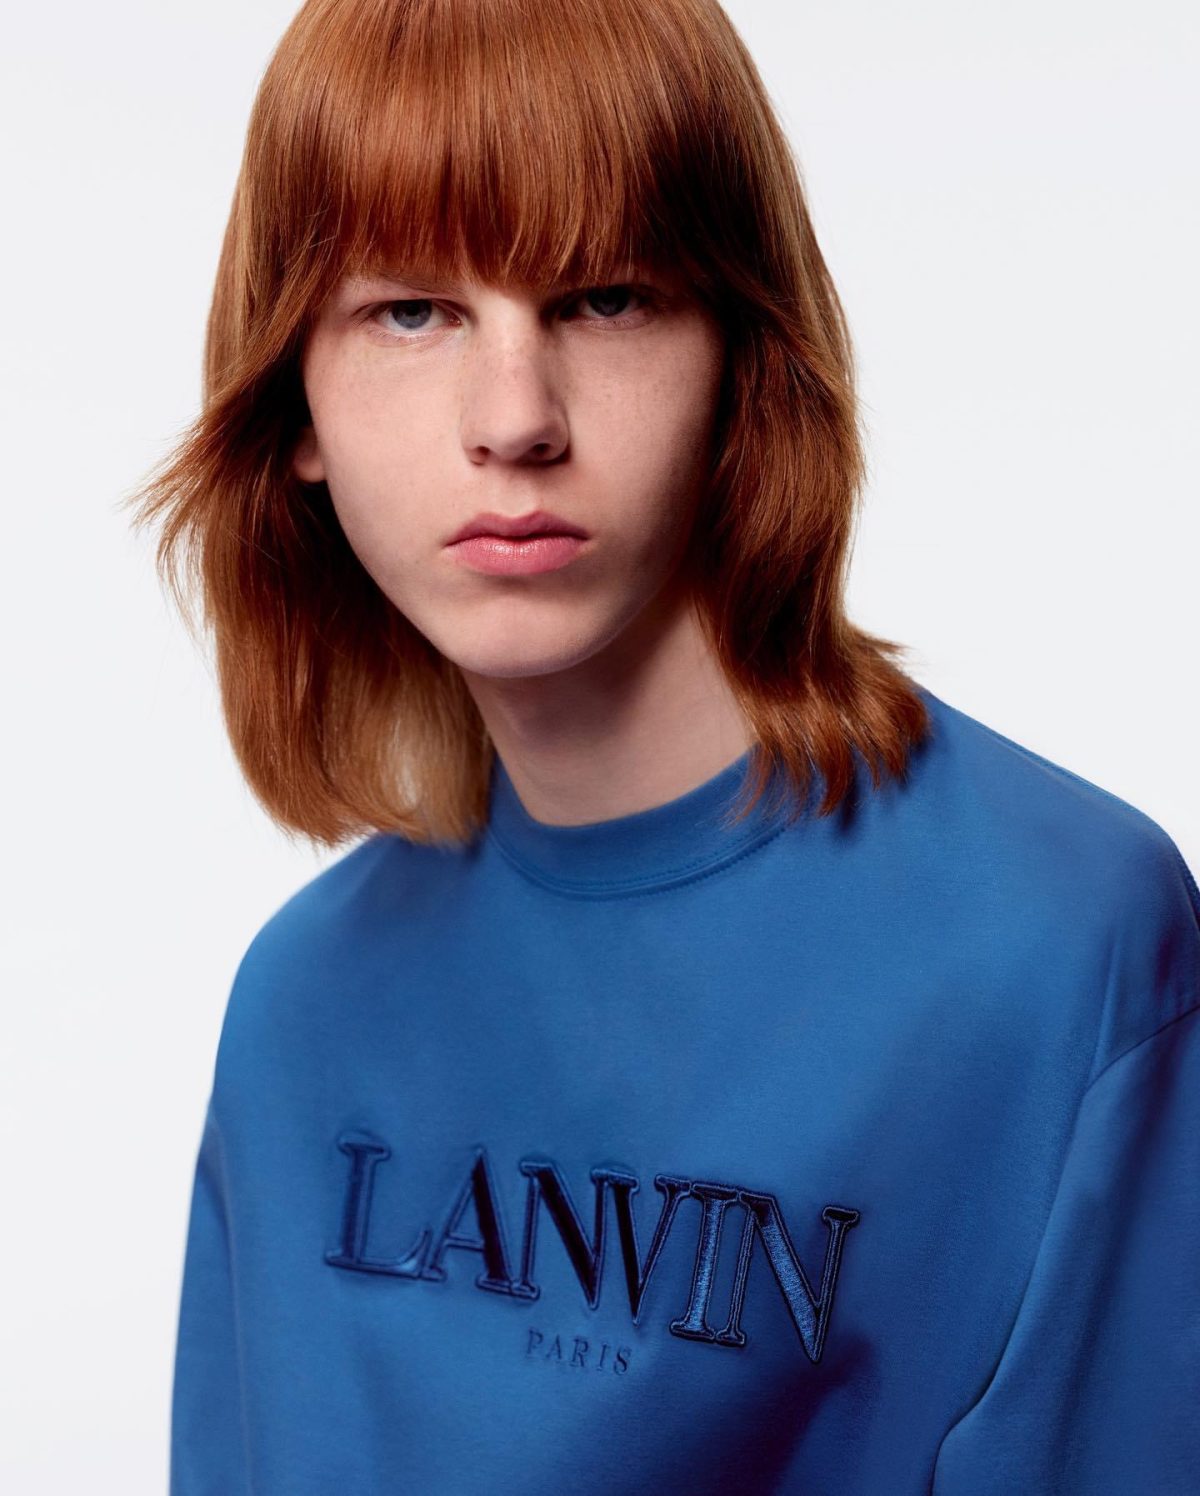 portrait-of-style-by-lanvin-an-homage-to-individuality